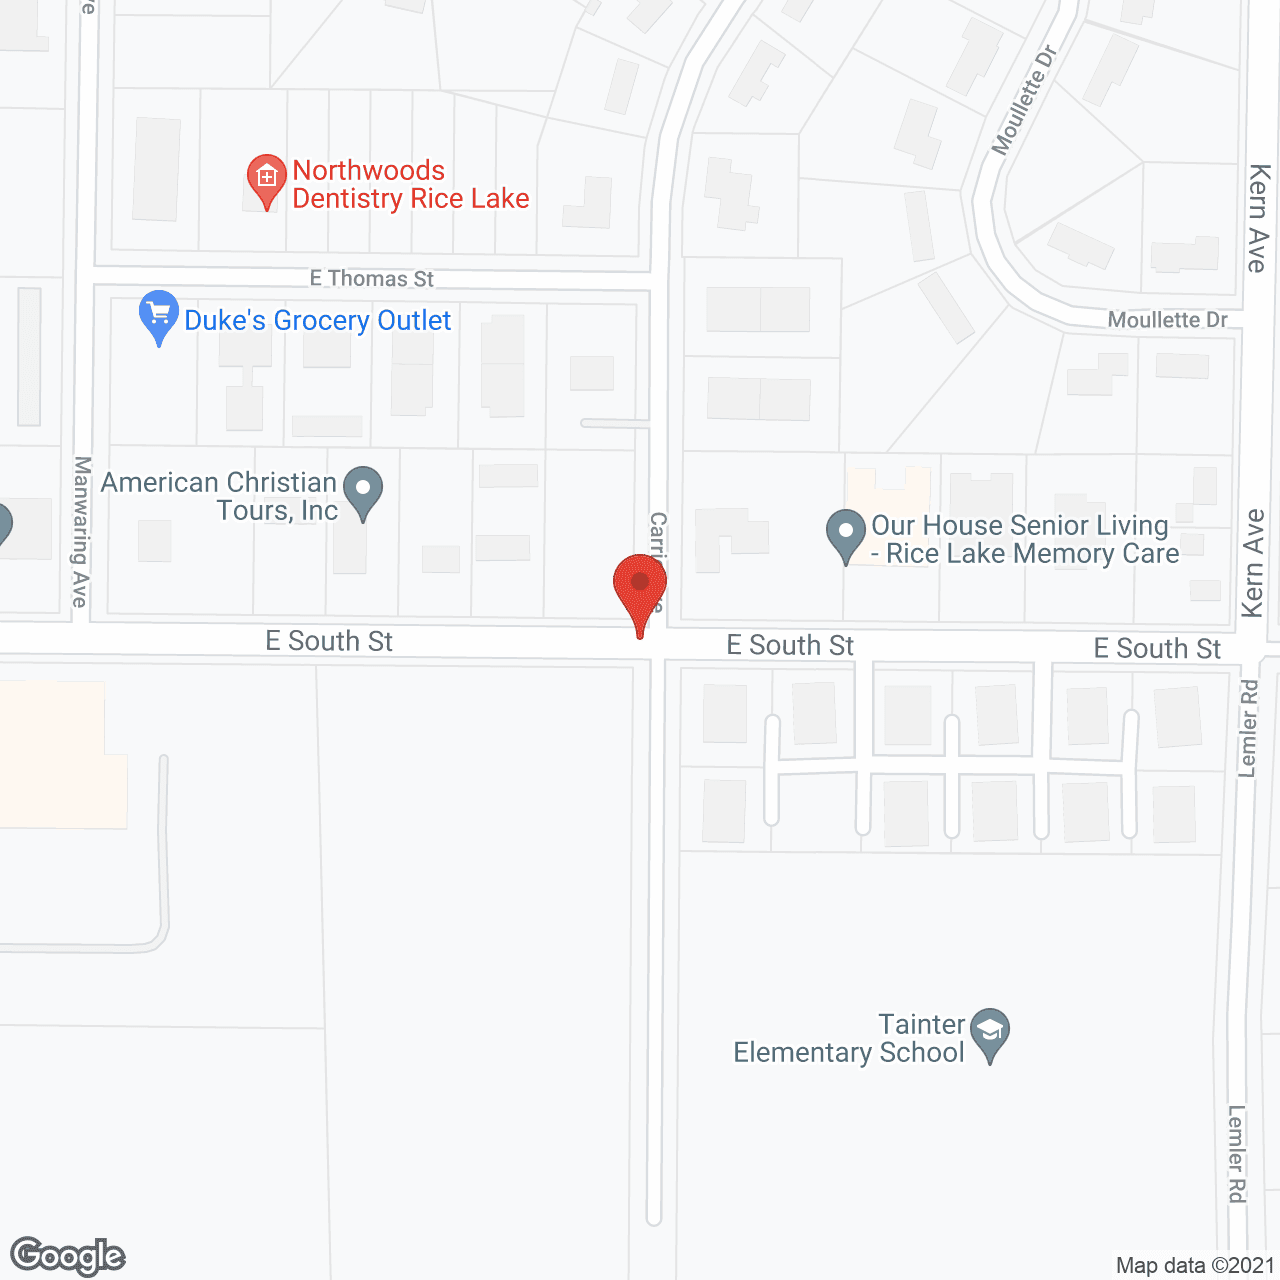 Our House Senior Living Assisted Care - Rice Lake in google map